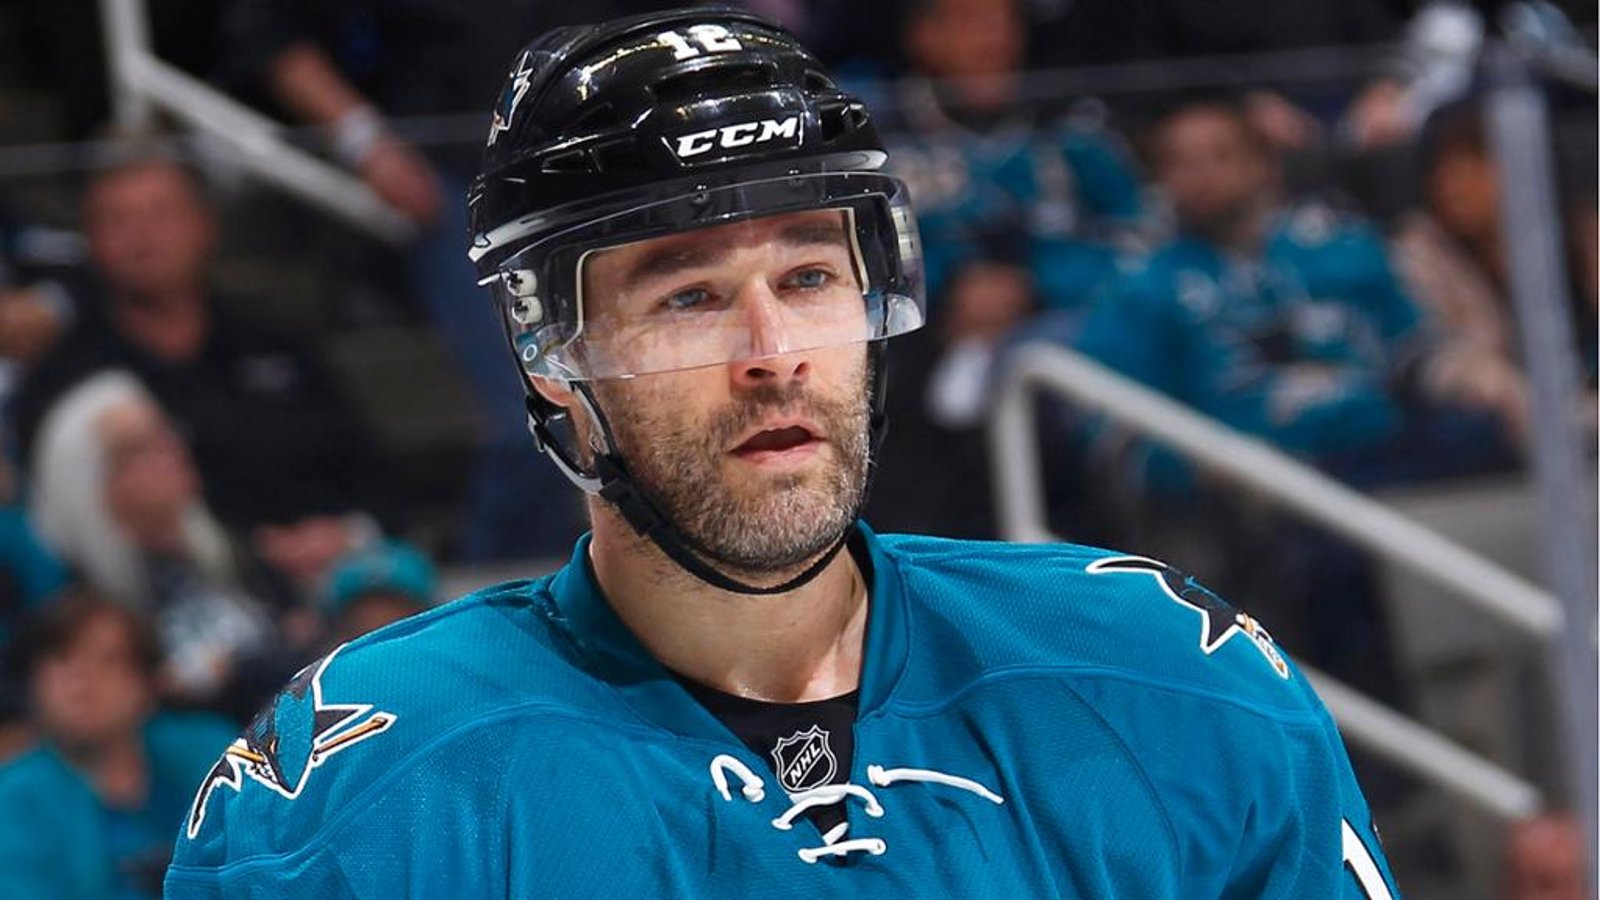 Patrick Marleau on the verge of signing new NHL contract 